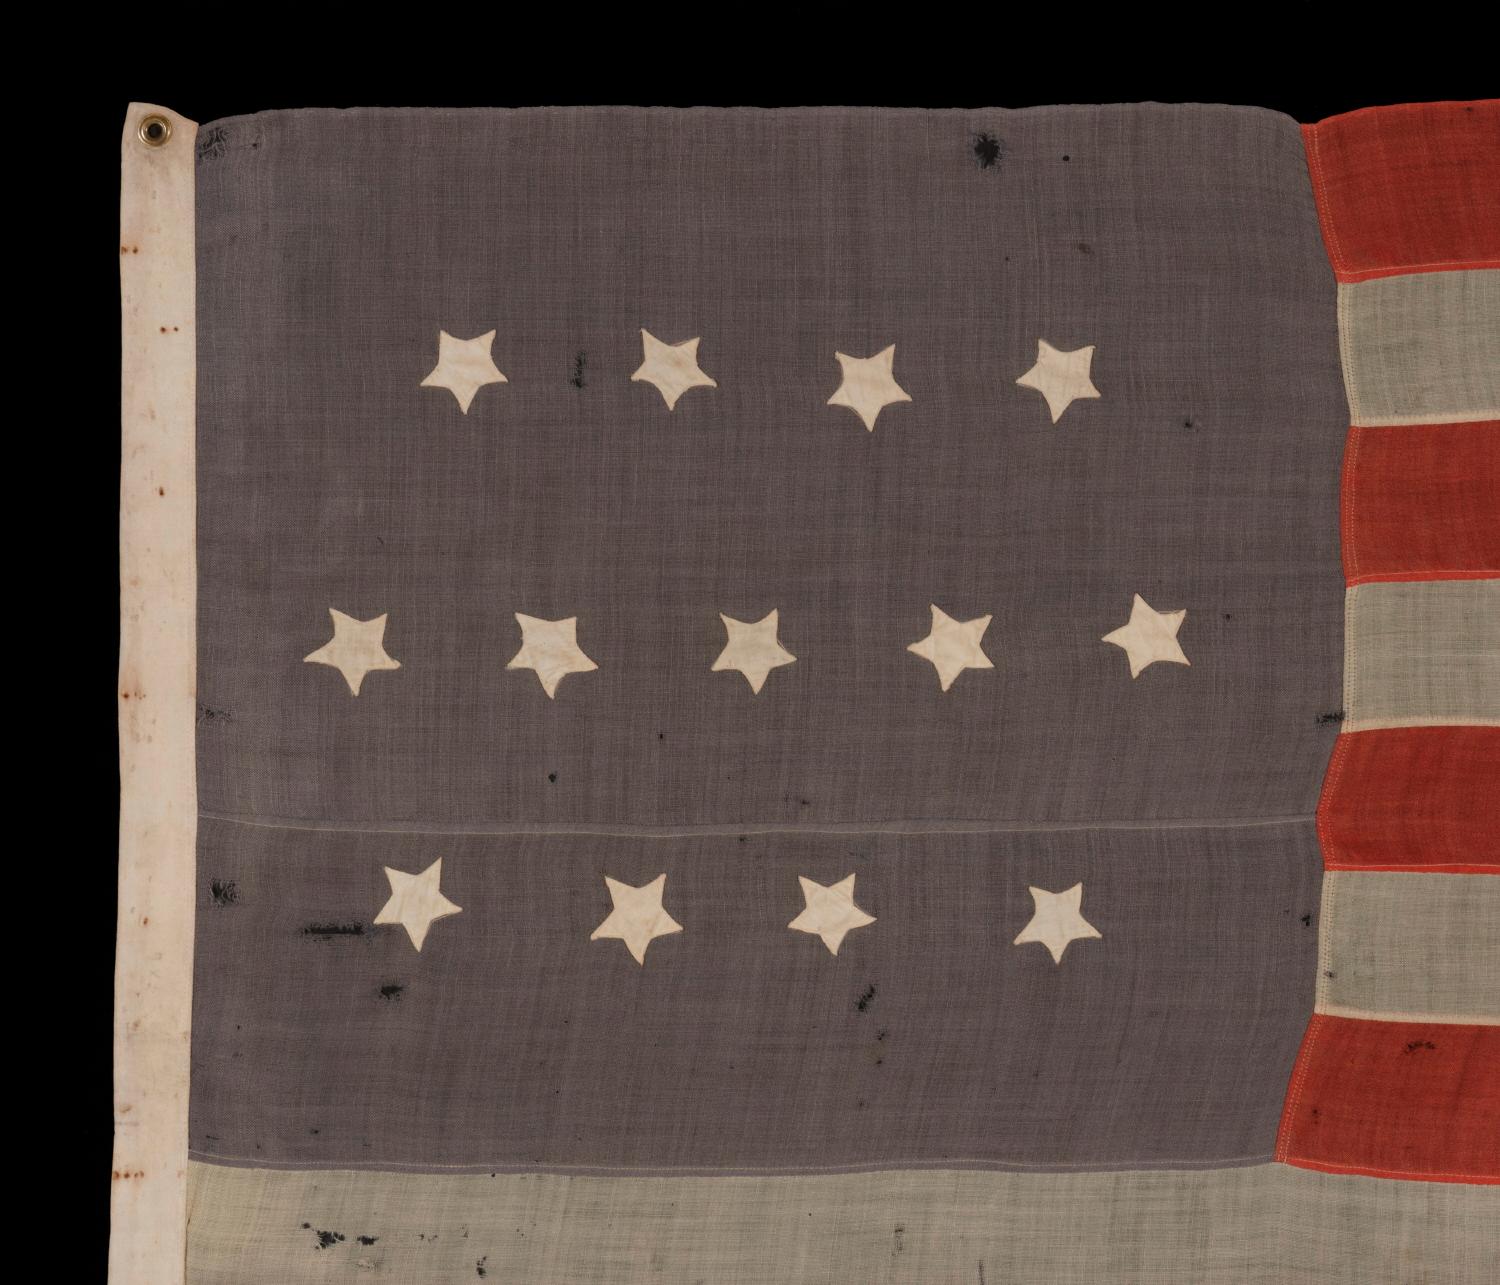 13 Stars In A 4-5-4 Pattern On Dusty Blue-grey Canton, On An Antique American Flag Made During The Last Decade Of The 19th Century, Ca 1890-1895:

13 star American national flag, made approximately at the opening of the 1890's (ca 1889-1895). The